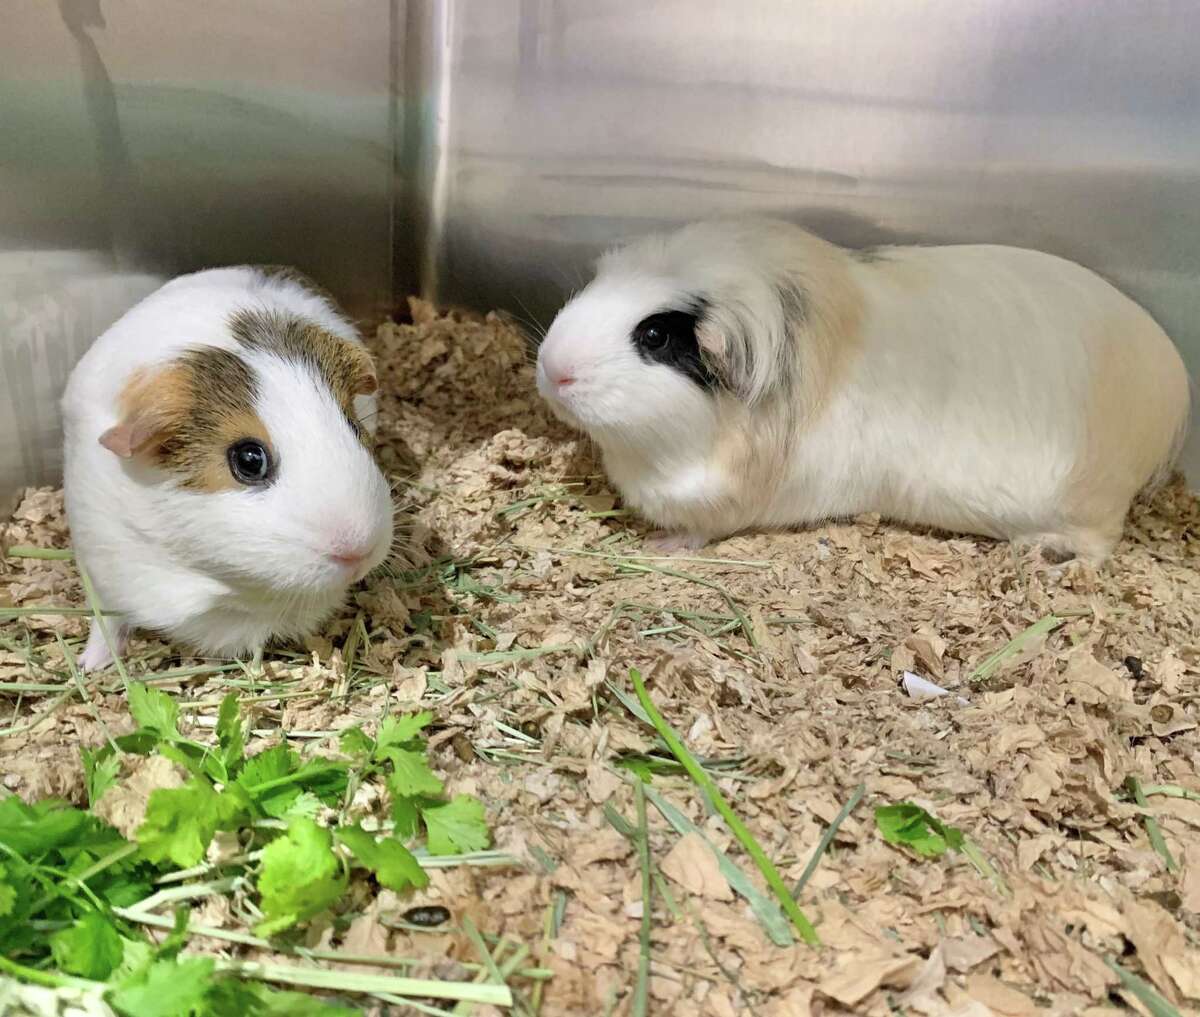 Katie and Peanut are two peas in a pod…er, in a pigloo. These two Guinea pig girls are a bonded pair at the Connecticut Humane Society and looking for a home together. Katie, who is fluffier and larger, is 2 years old, and her buddy Peanut is 3 years old. They love hanging out in their pigloos, burrowing in blankets, and snacking on leafy greens, and they enjoy being handled once you have them in your lap. Katie even loves getting her chin scratched, and will lift her head higher and higher for more scratchies. Visit CThumane.org/adopt to learn more. An online application can be found in each pet’s profile.